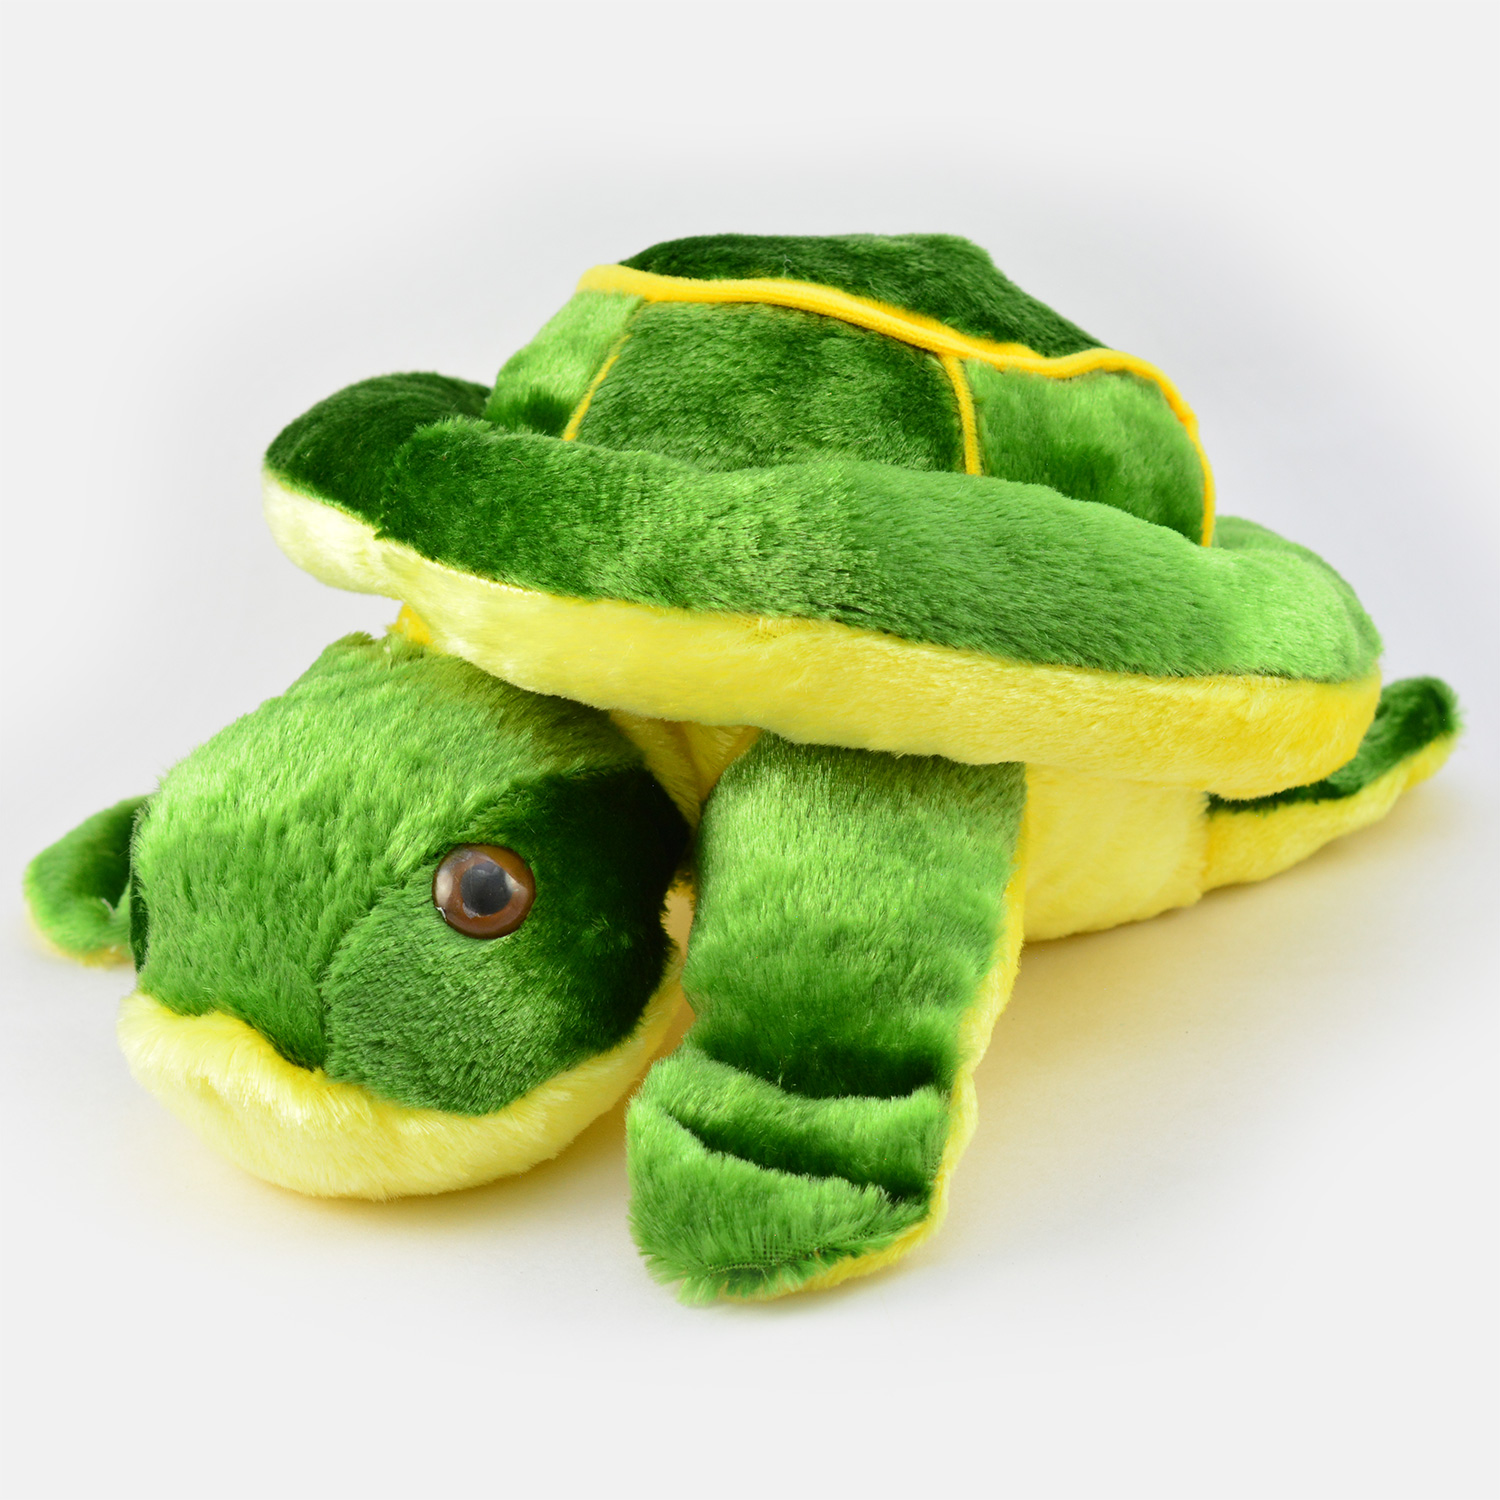 Furry Turtle Soft Toy with Green Shell